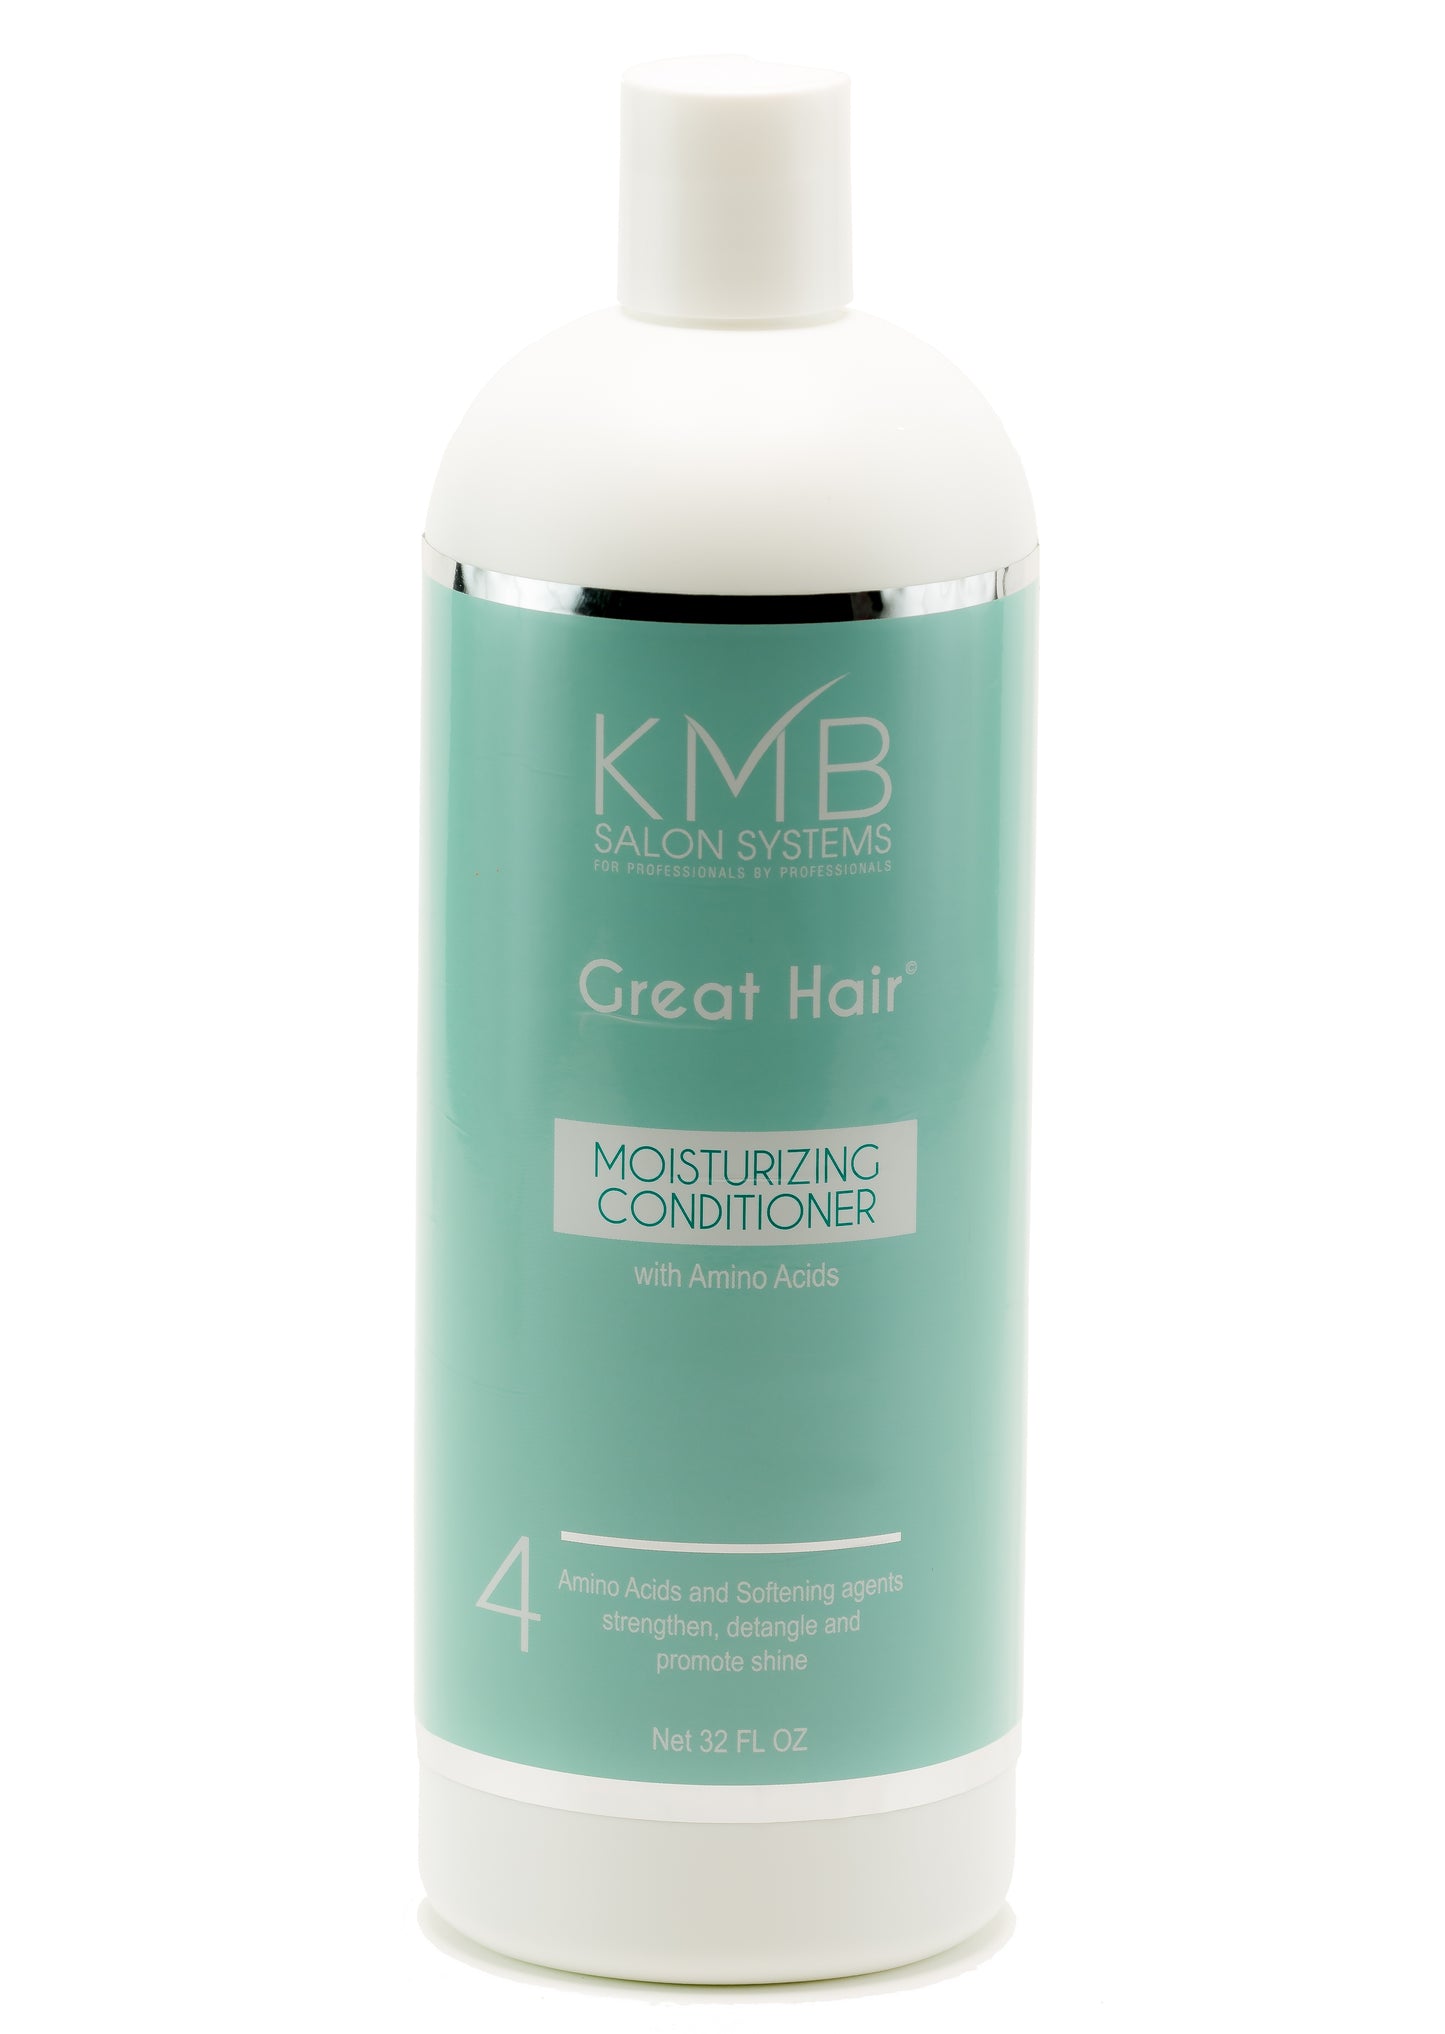 Great Hair Moisturizing Conditioner is paraben free and replenishes moisture to the hair and provides softening agents for manageability.